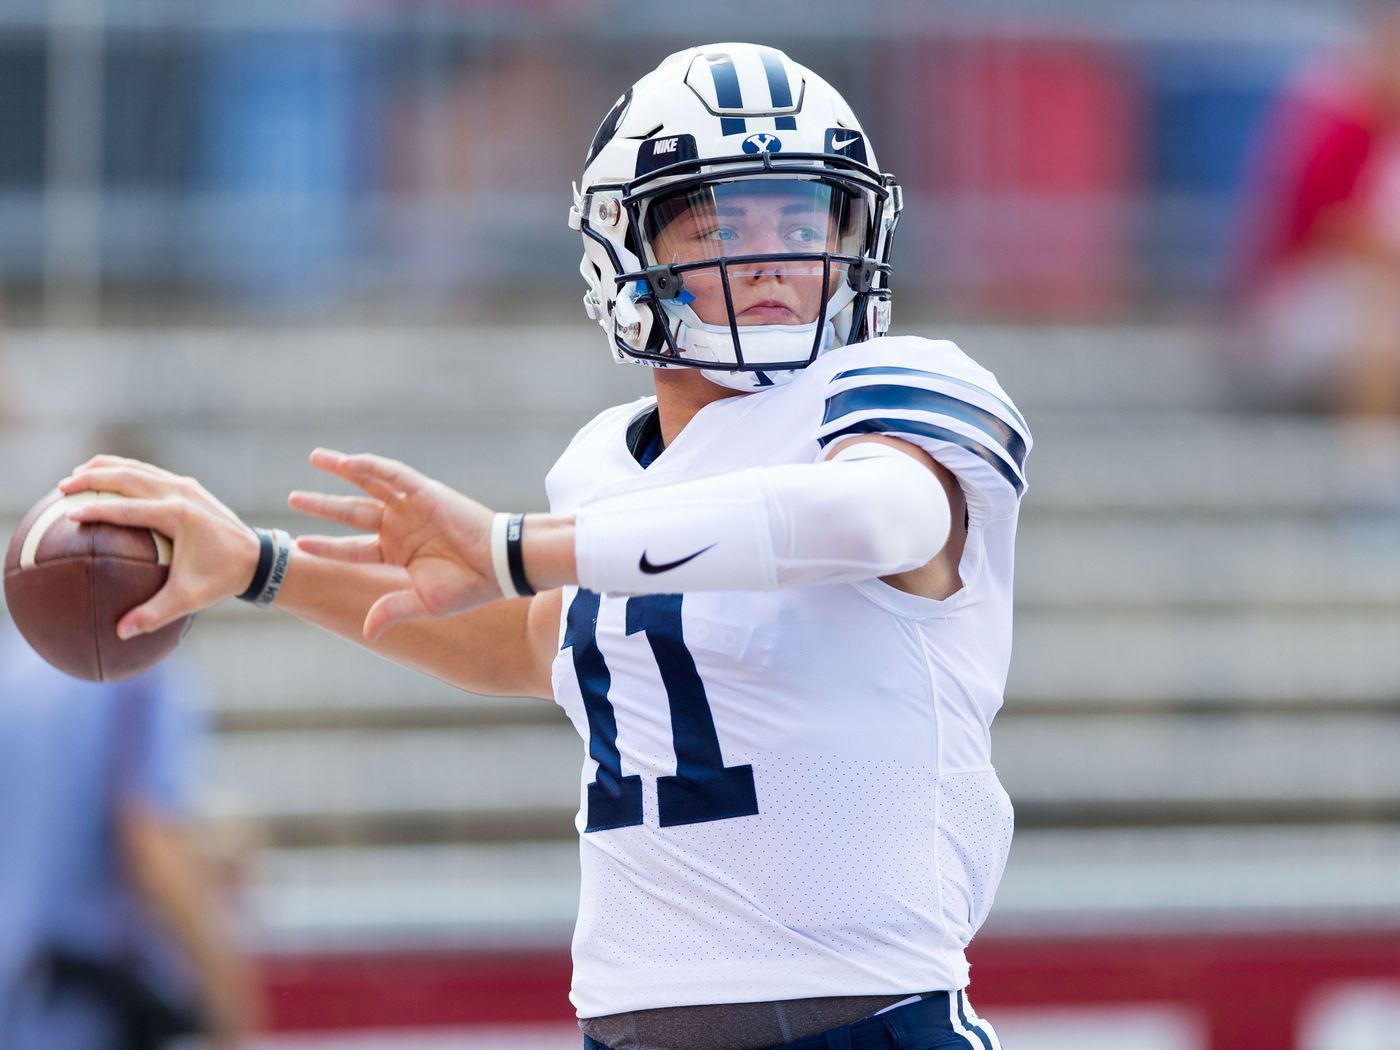 Jeff Grimes: Zach Wilson “in a position to compete” for starting QB spot versus Hawaii